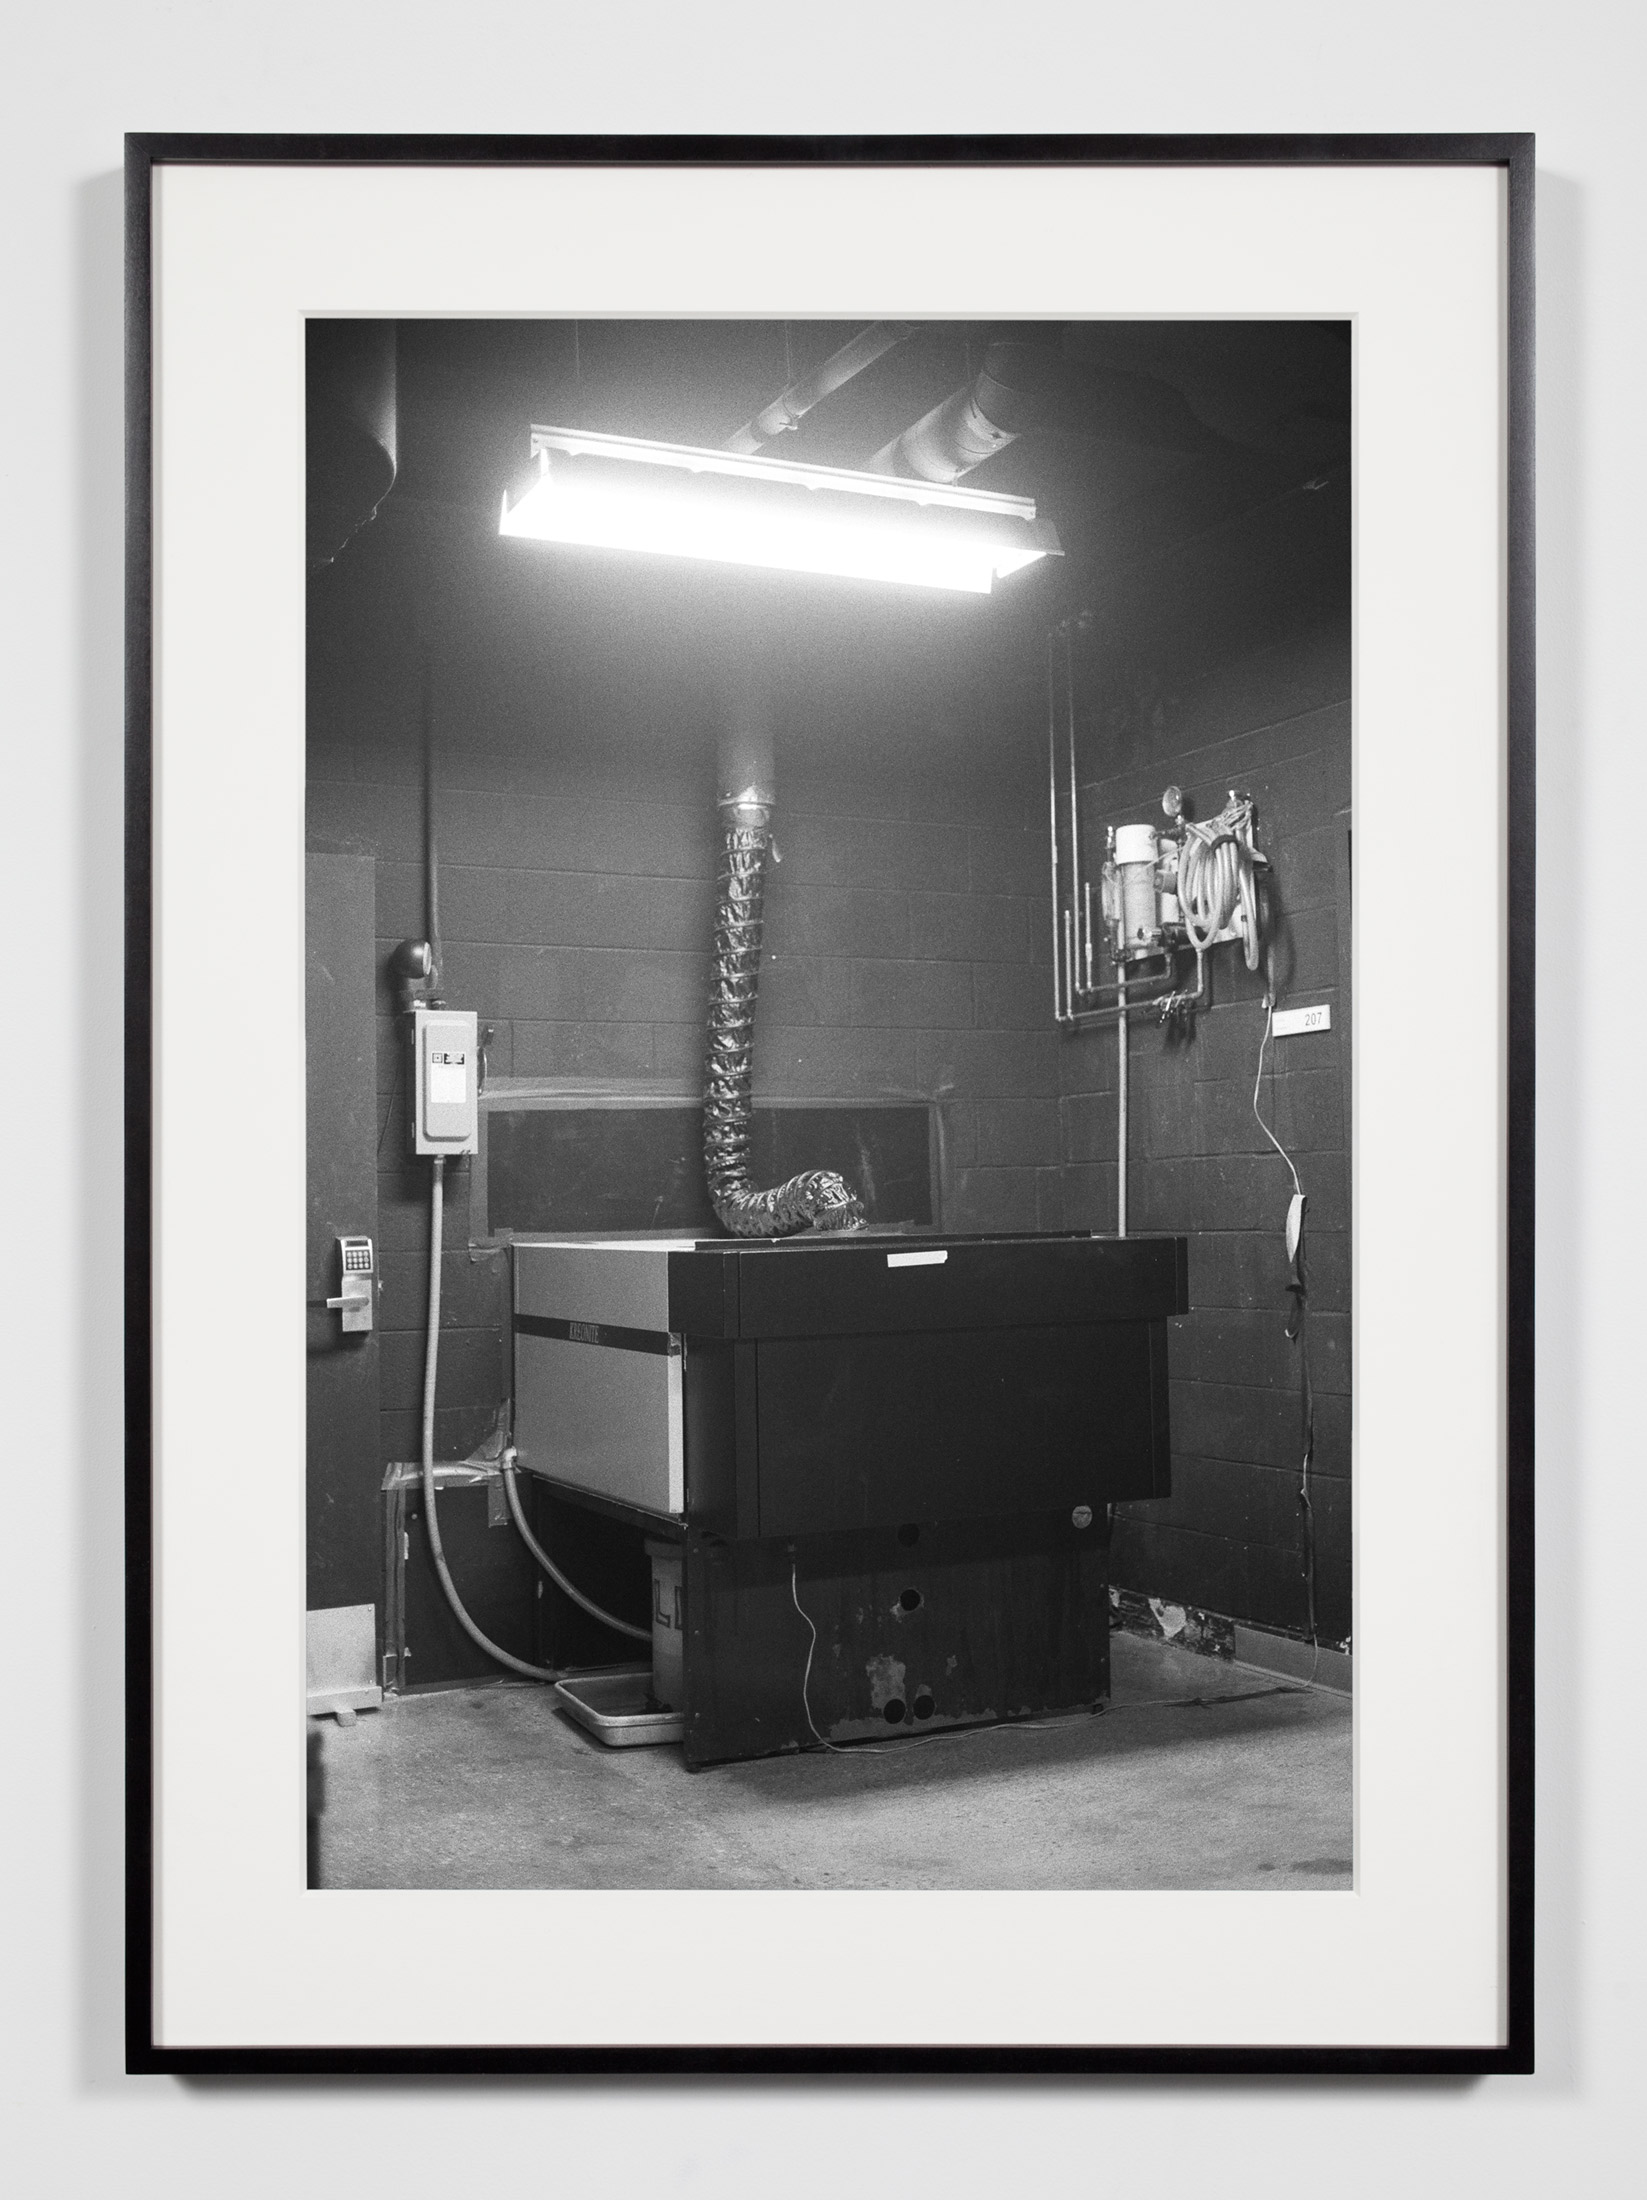   College Darkroom, Color Photographic Processor, Chicago, Illinois, August 21, 2008    2011   Epson Ultrachrome K3 archival ink jet print on Hahnemühle Photo Rag paper  36 3/8 x 26 3/8 inches   Industrial Portraits, 2008–     